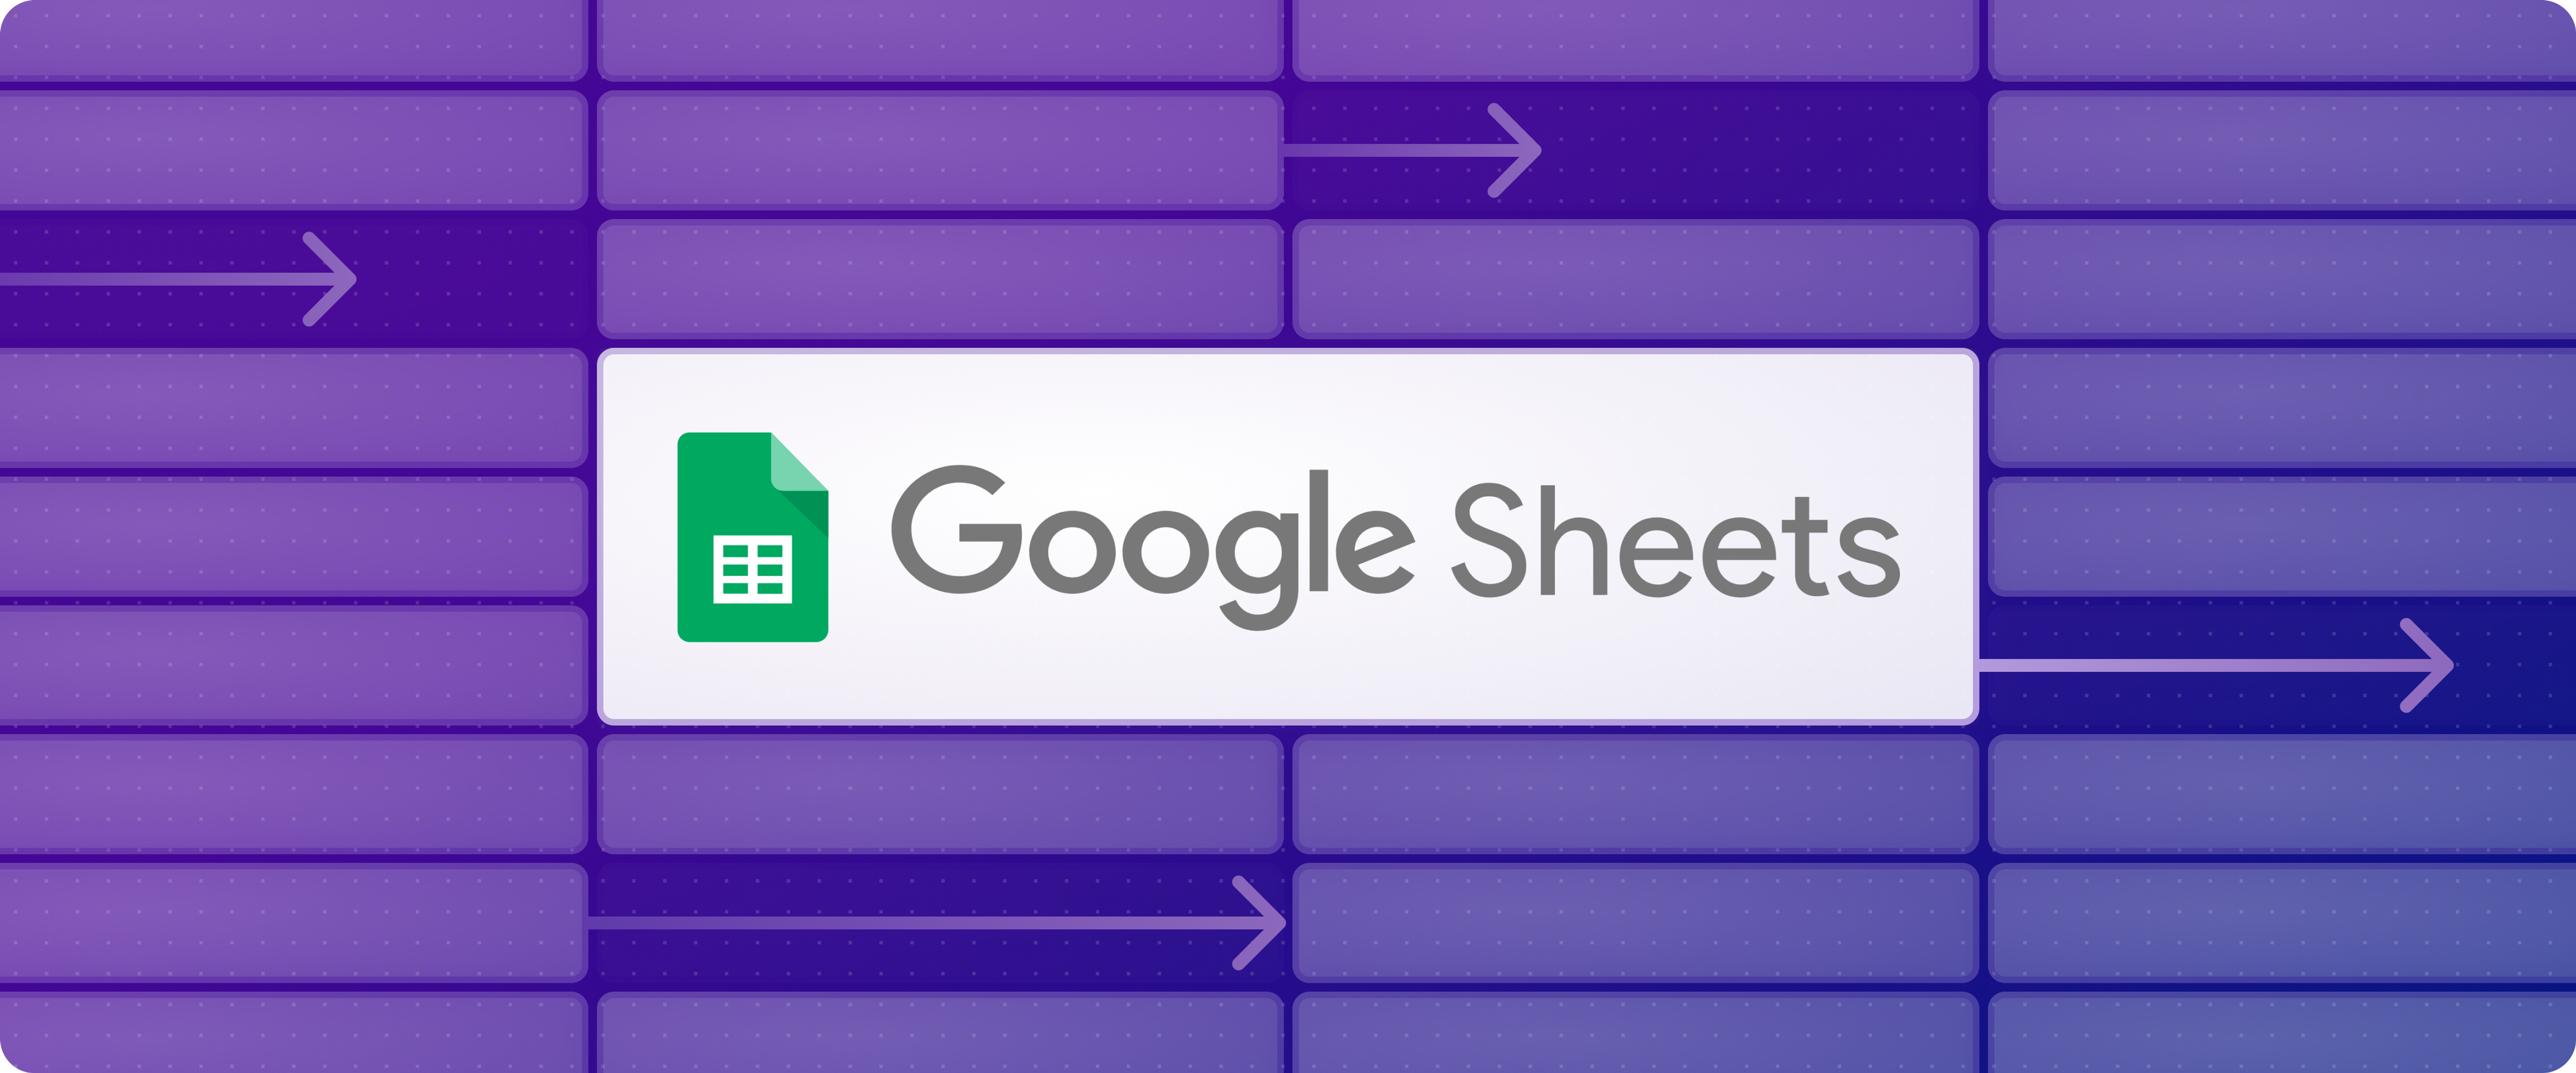 Decorative banner with Google Sheets logo